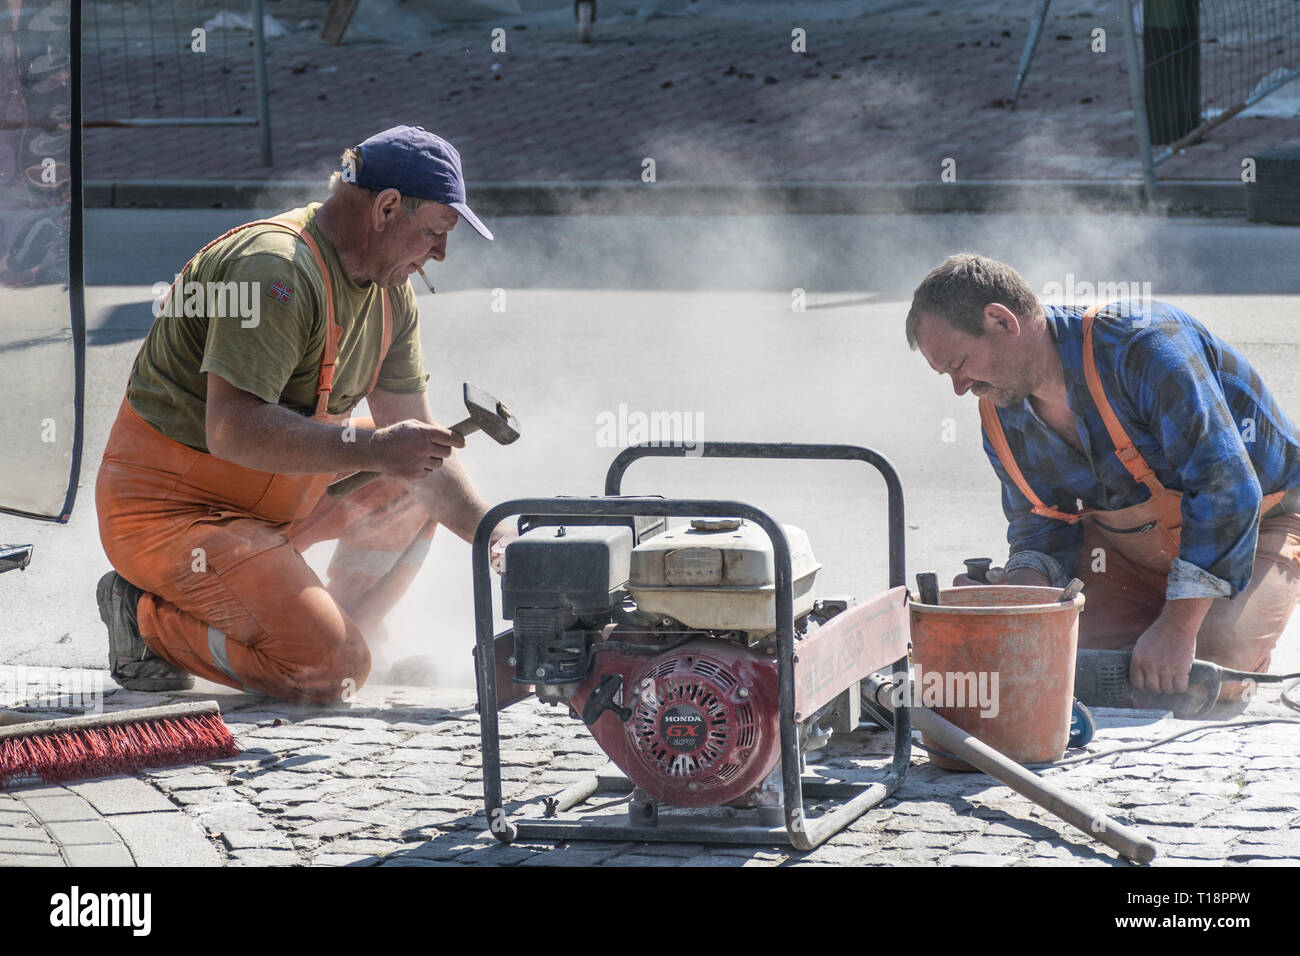 Krakow, Poland - September 21, 2019: Road workers at asphalt roadway street patching reaparing work while smokes a cigar Stock Photo